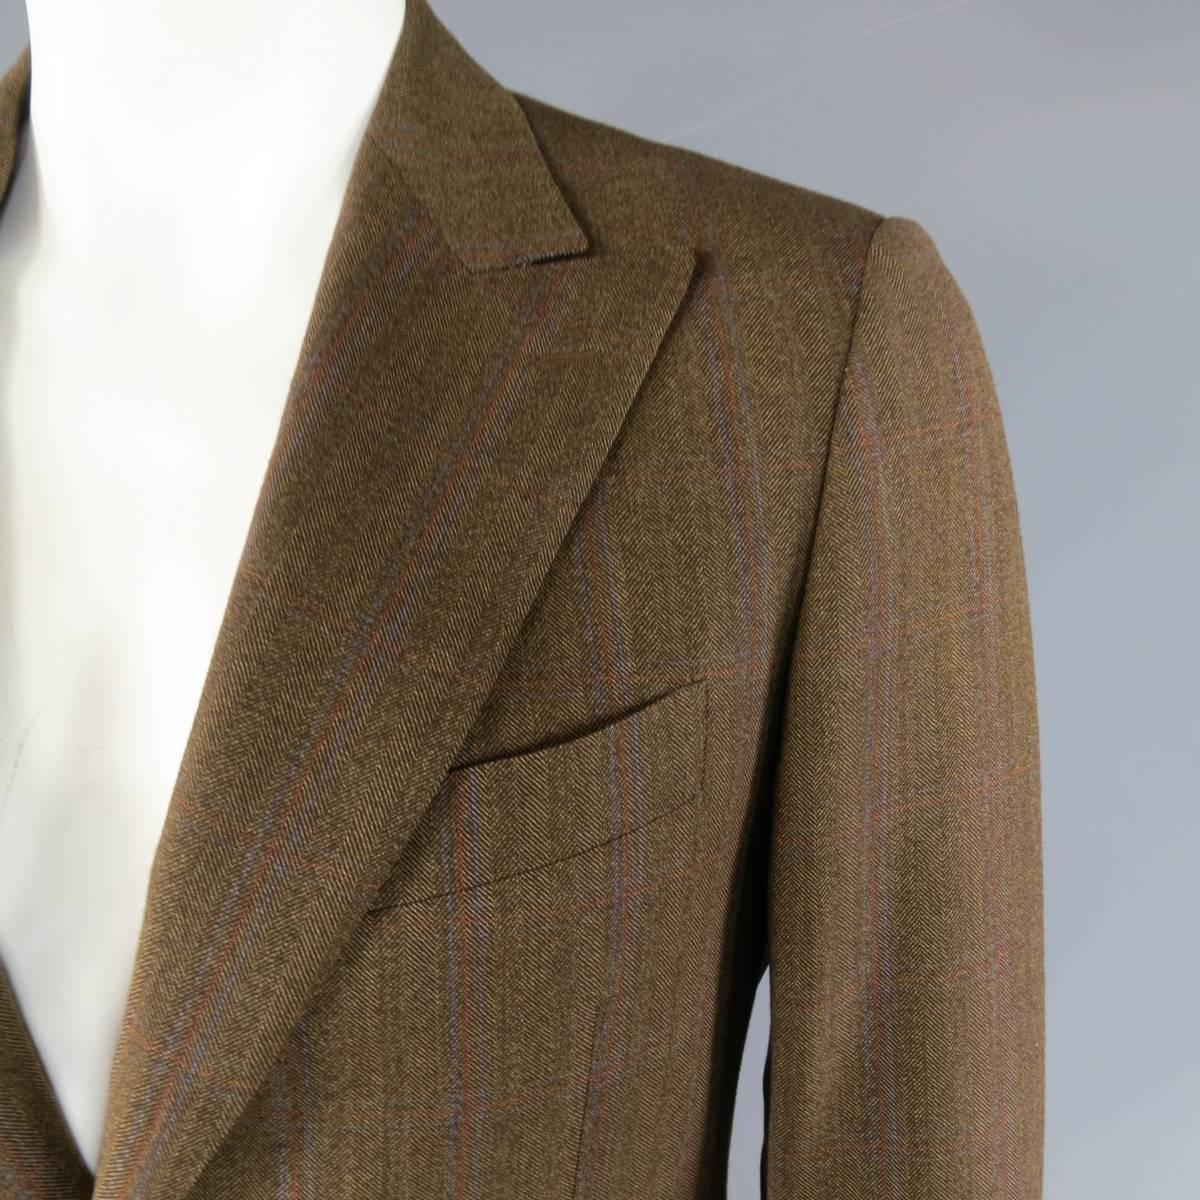 Classic PAL ZILERI two button sport coat in a light brown harringbone textured wool with all over blue and red windowpane print. Detailed with a top stitch peak lapel, flap pockets, functional button cuffs, and double vented back. Made in Italy.
